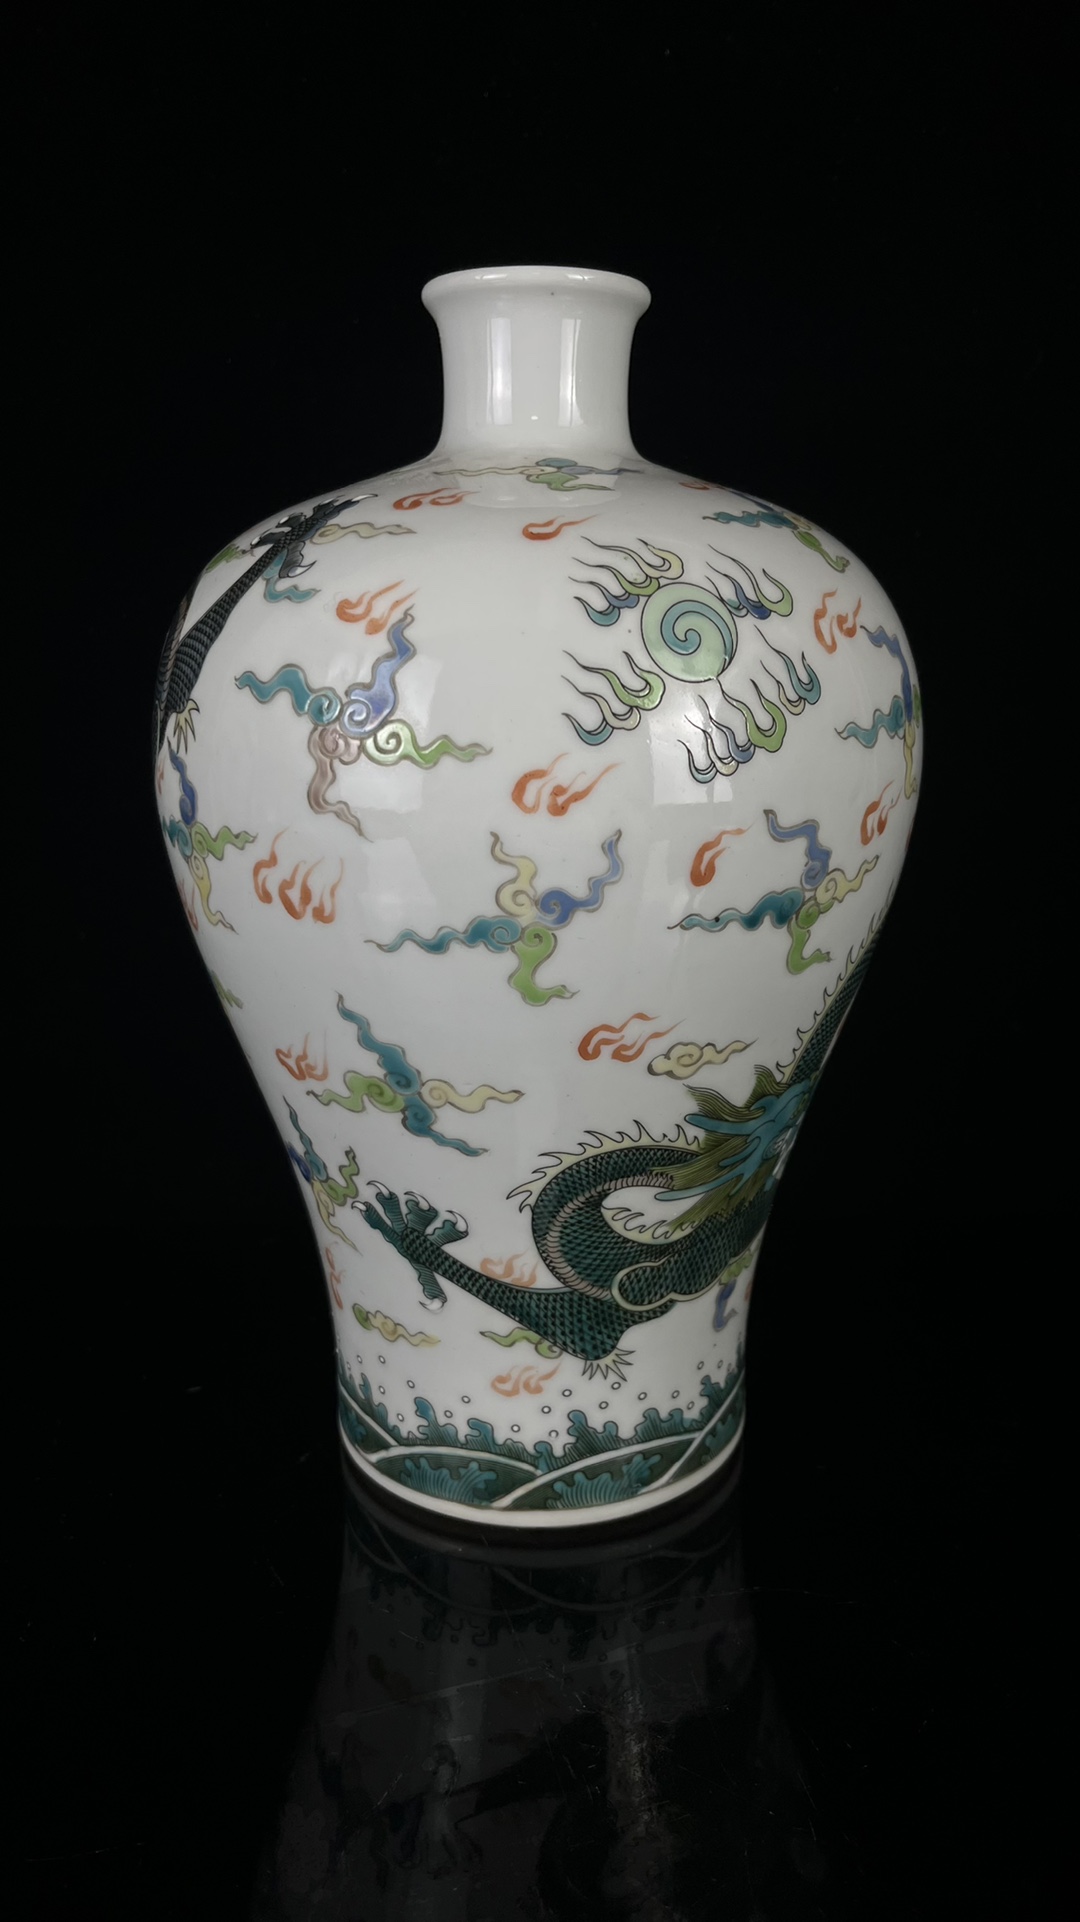 Five-color porcelain plate and dragon plum vase made in the Kangxi period of the Qing Dynasty - Image 3 of 8